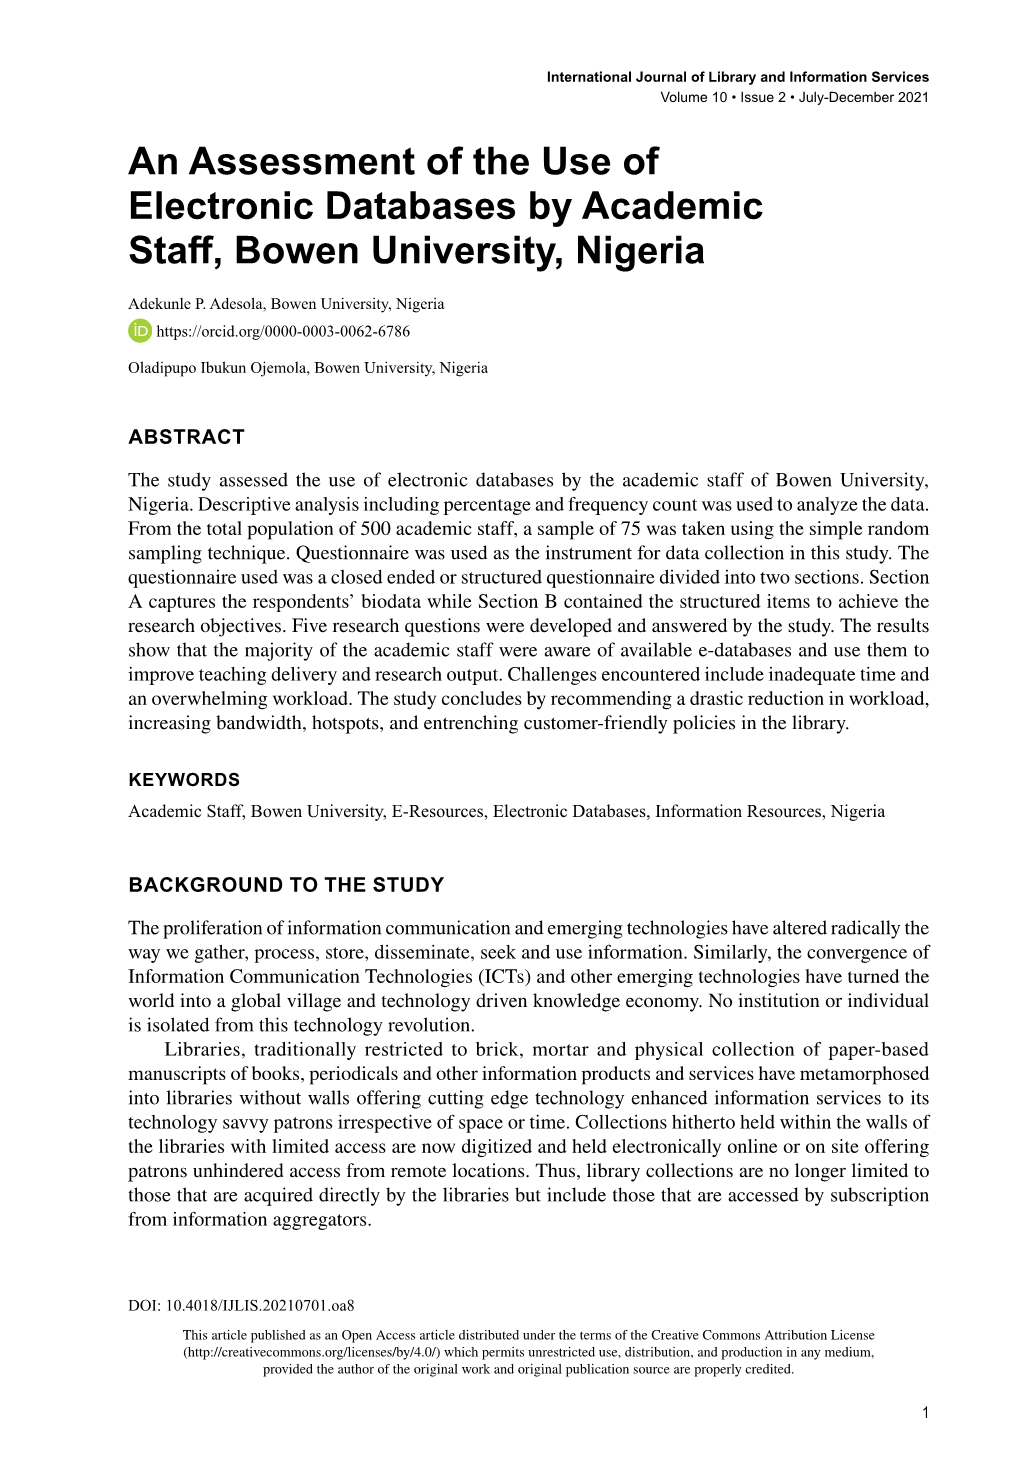 An Assessment of the Use of Electronic Databases by Academic Staff, Bowen University, Nigeria